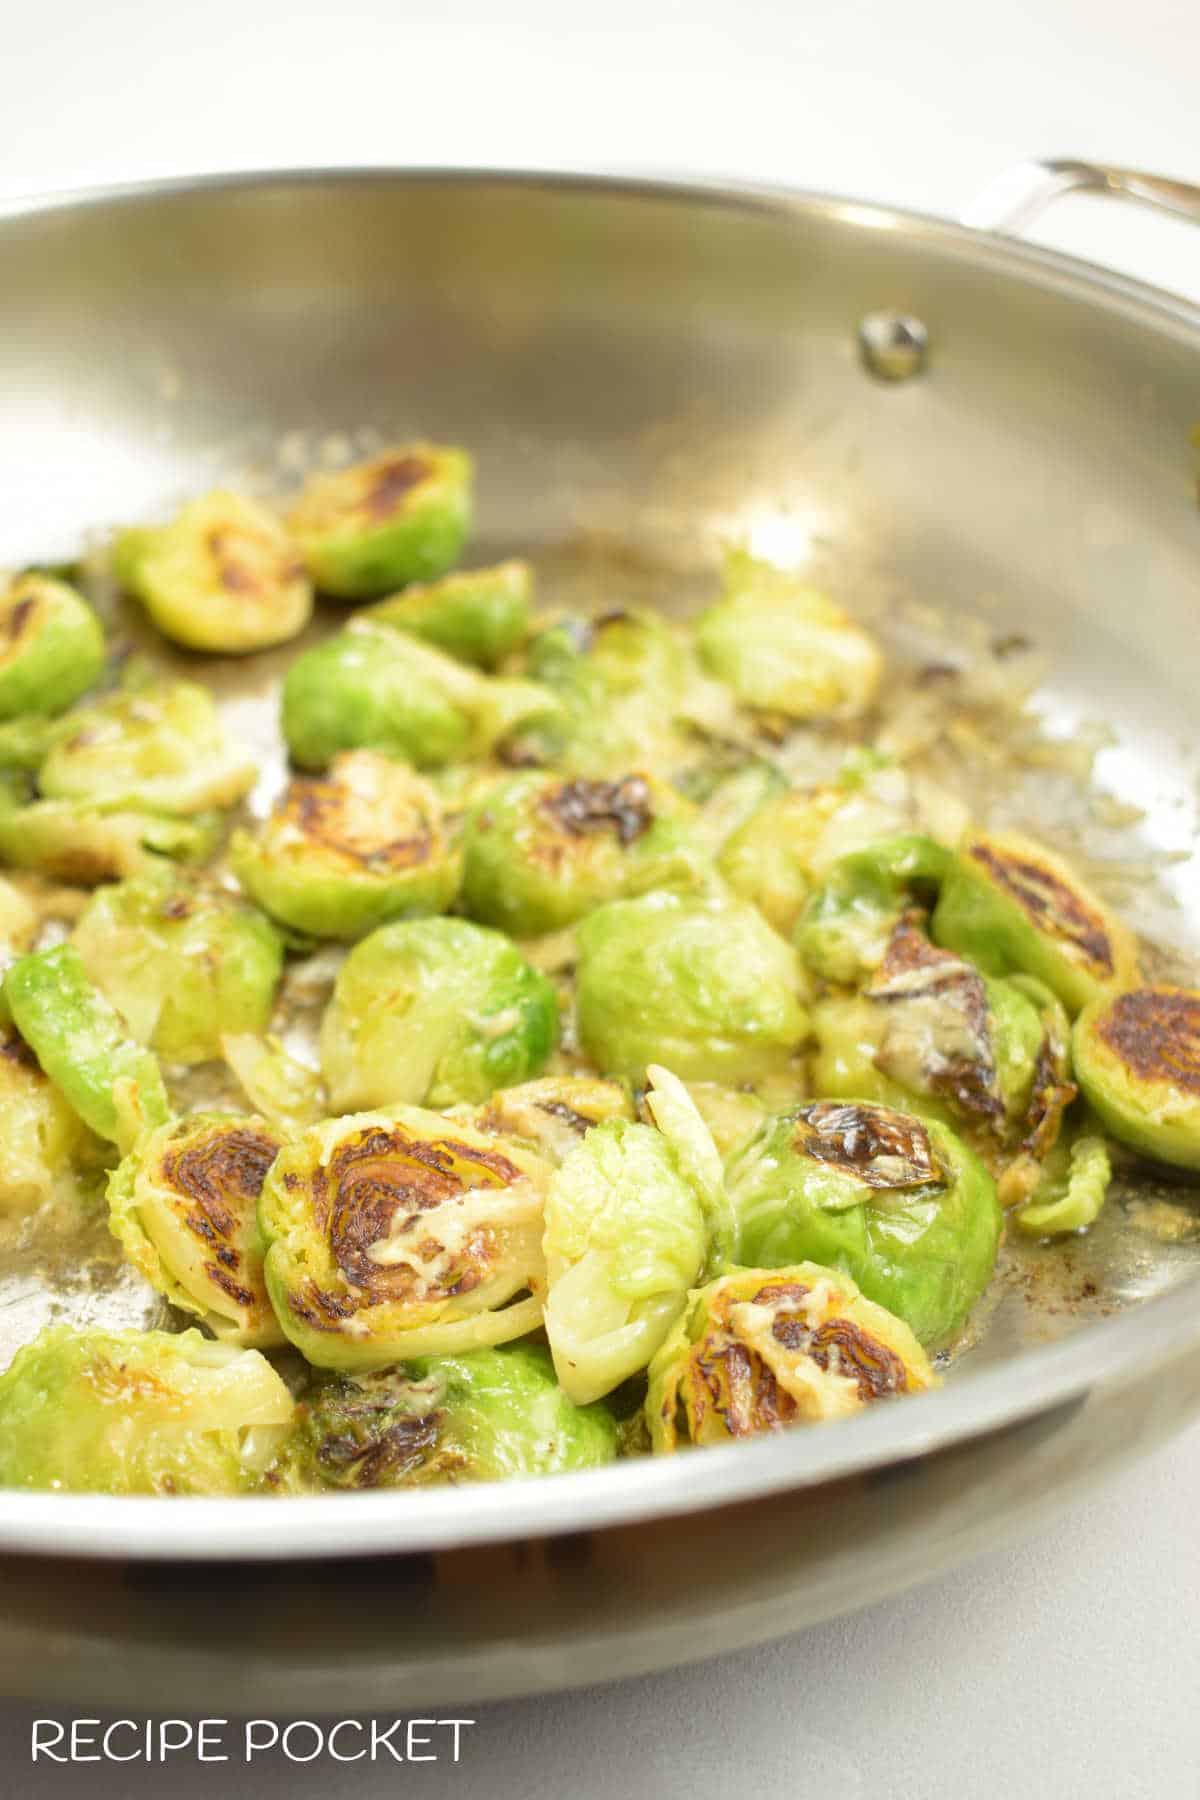 Image showing pan sauteed Brussel sprouts cooked and ready to serve.